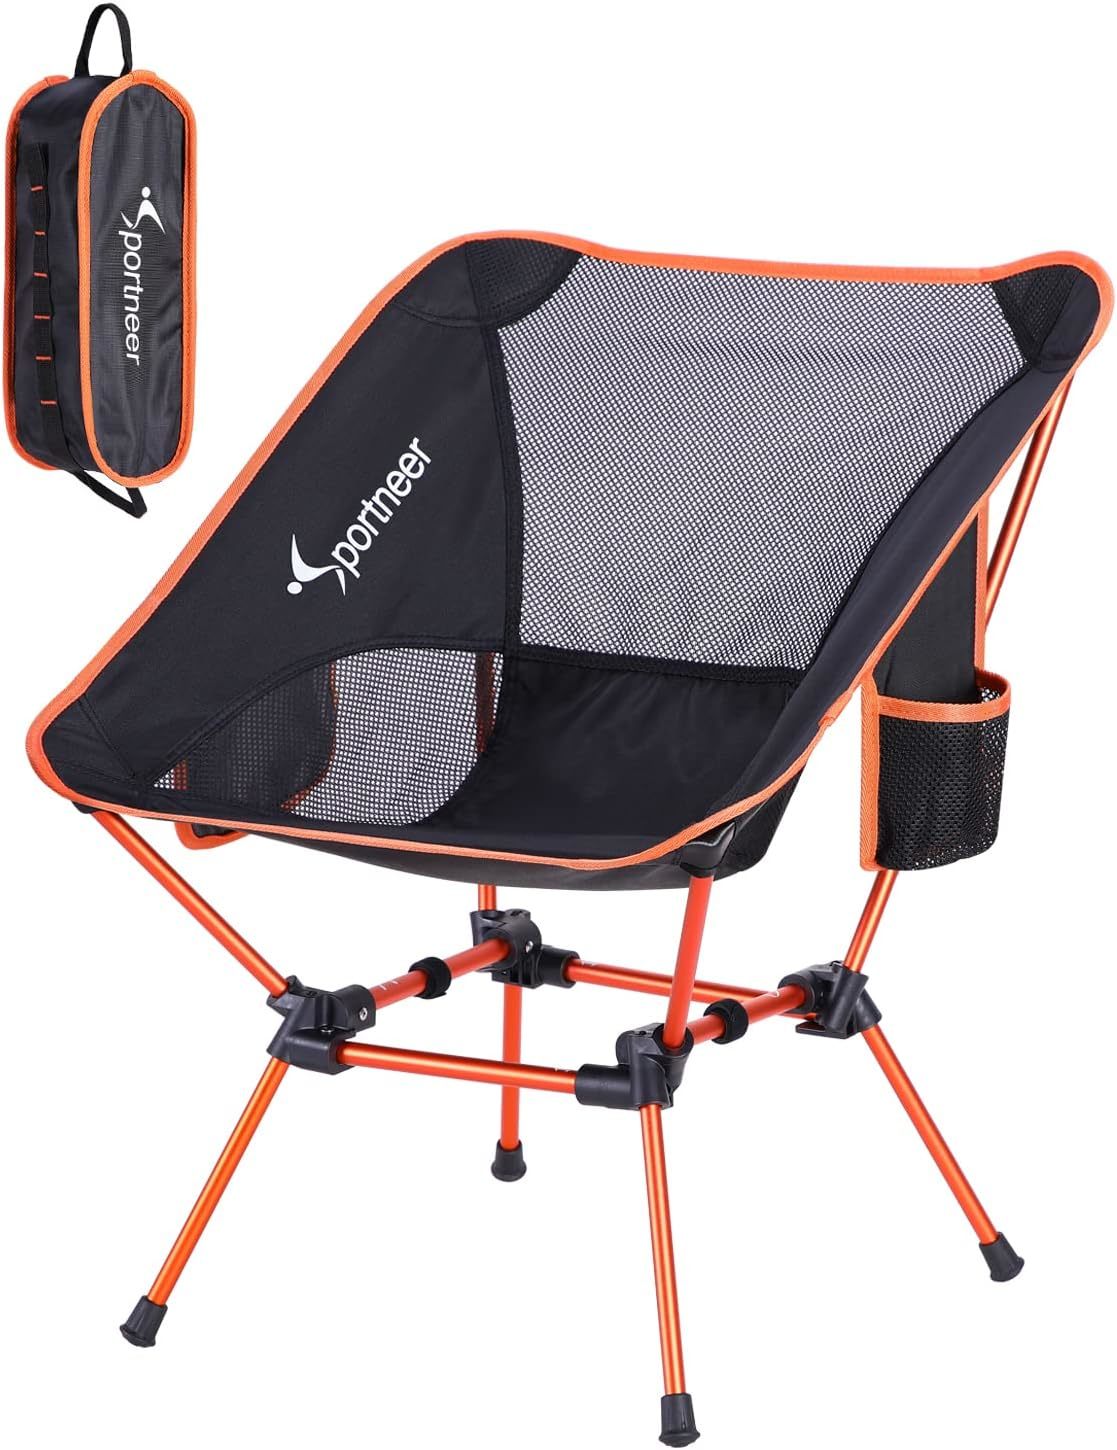 Primary image for The Sportneer Lightweight Portable Folding Camping Chair Compact Beach Camp